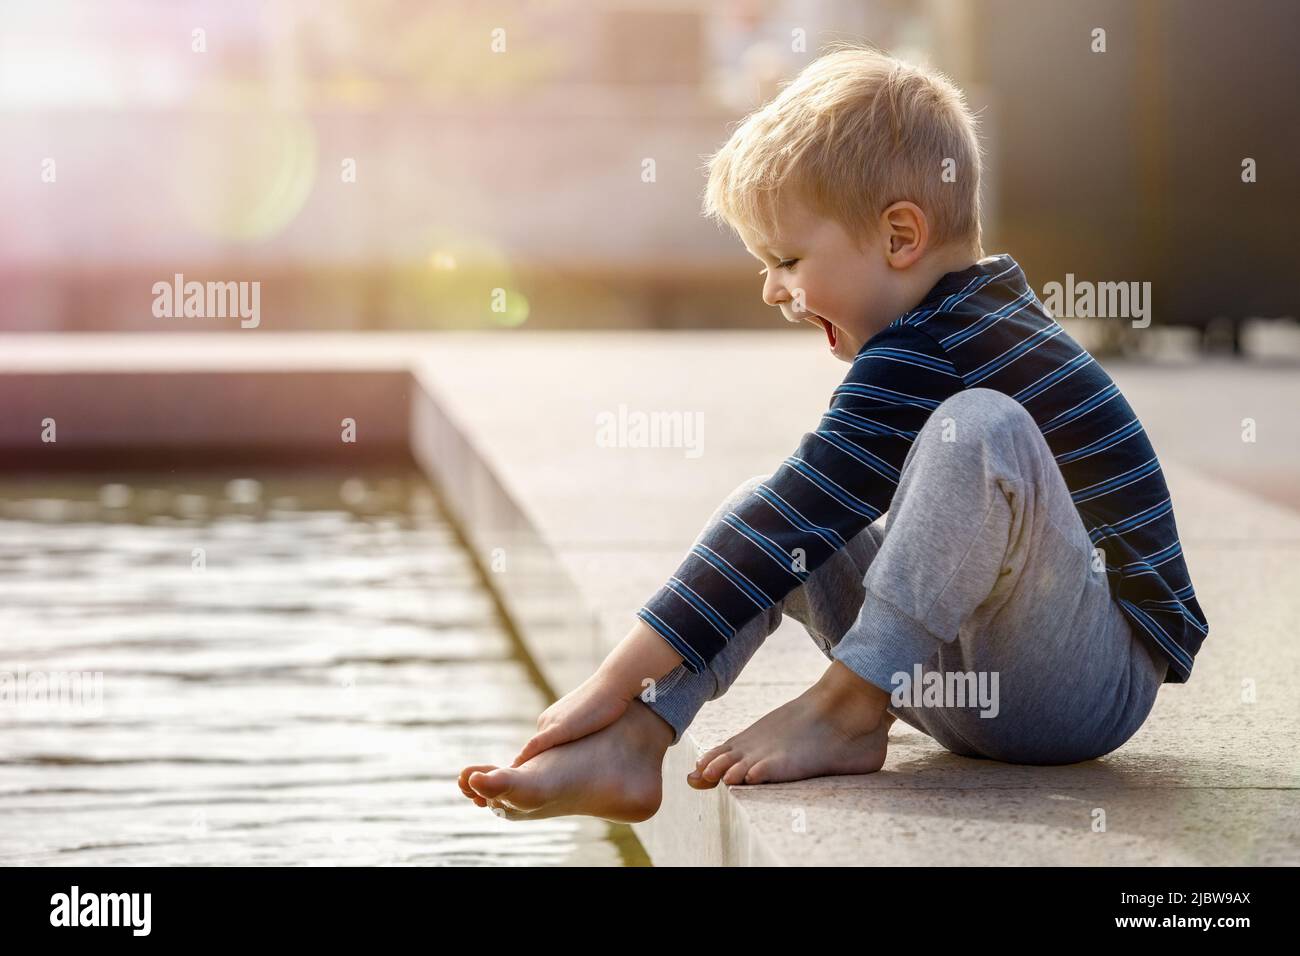 A hilarious boy on a hot summer day in the city is happy to try the cool water of the fountain on his barefoot. The child is surprised by the low wate Stock Photo